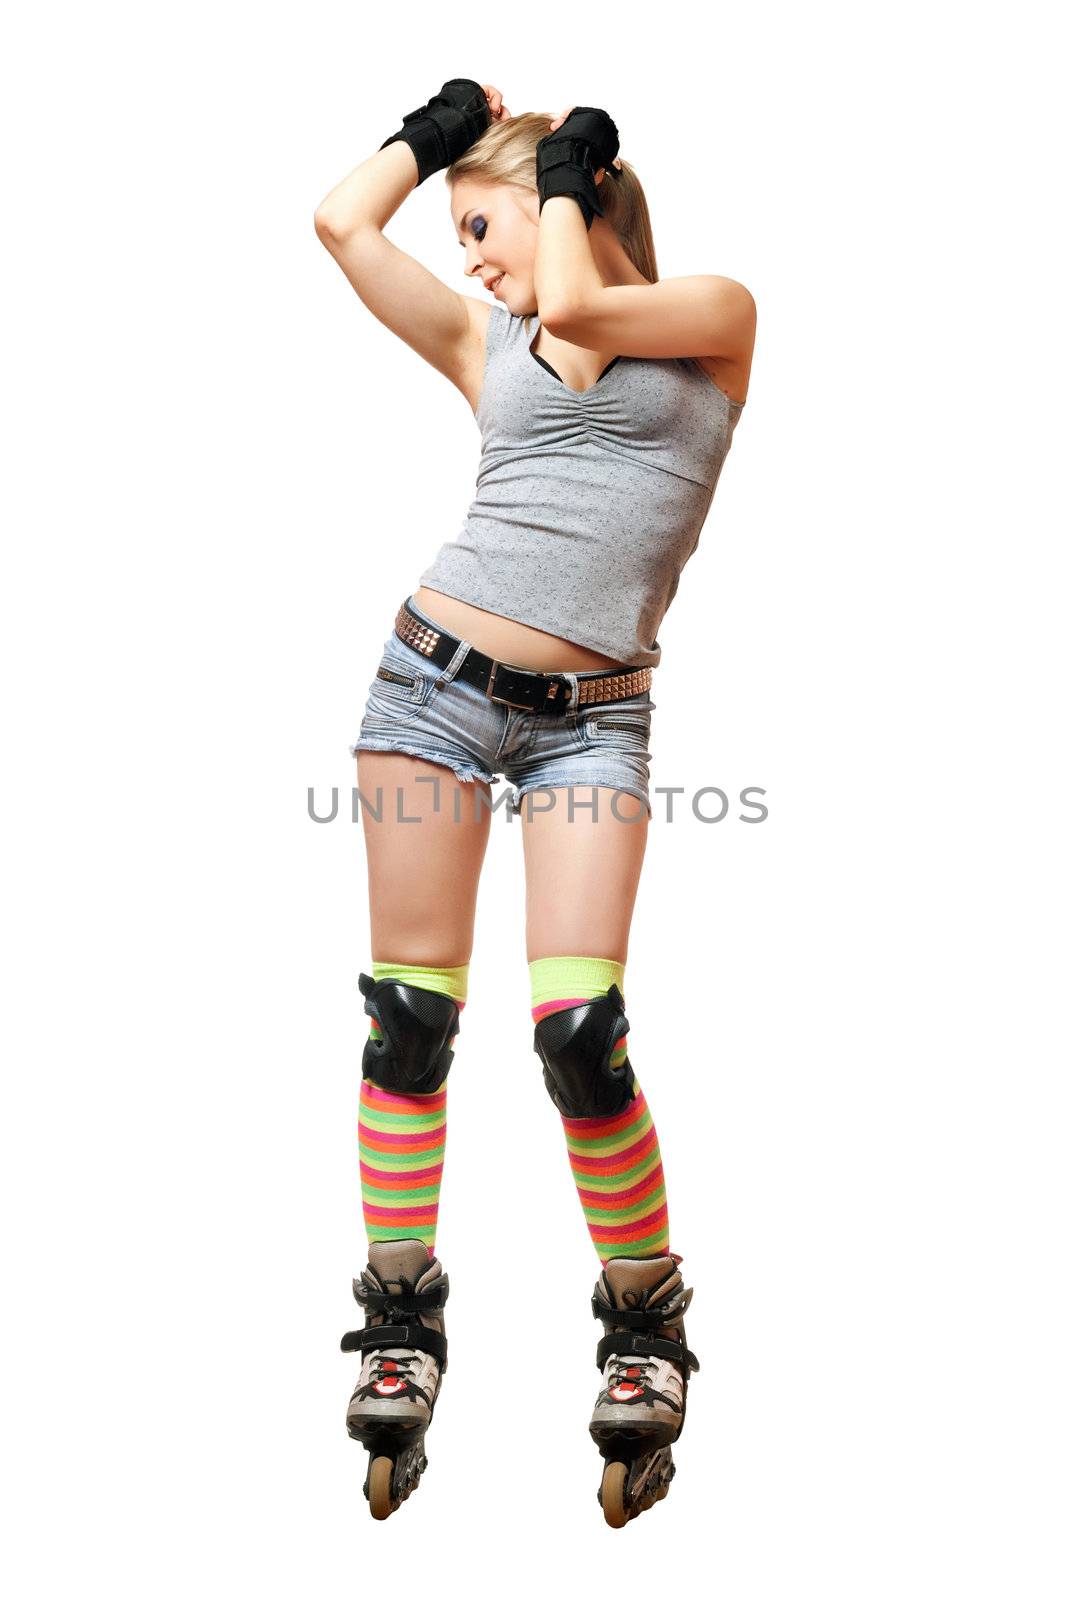 Playful pretty young blonde on roller skates